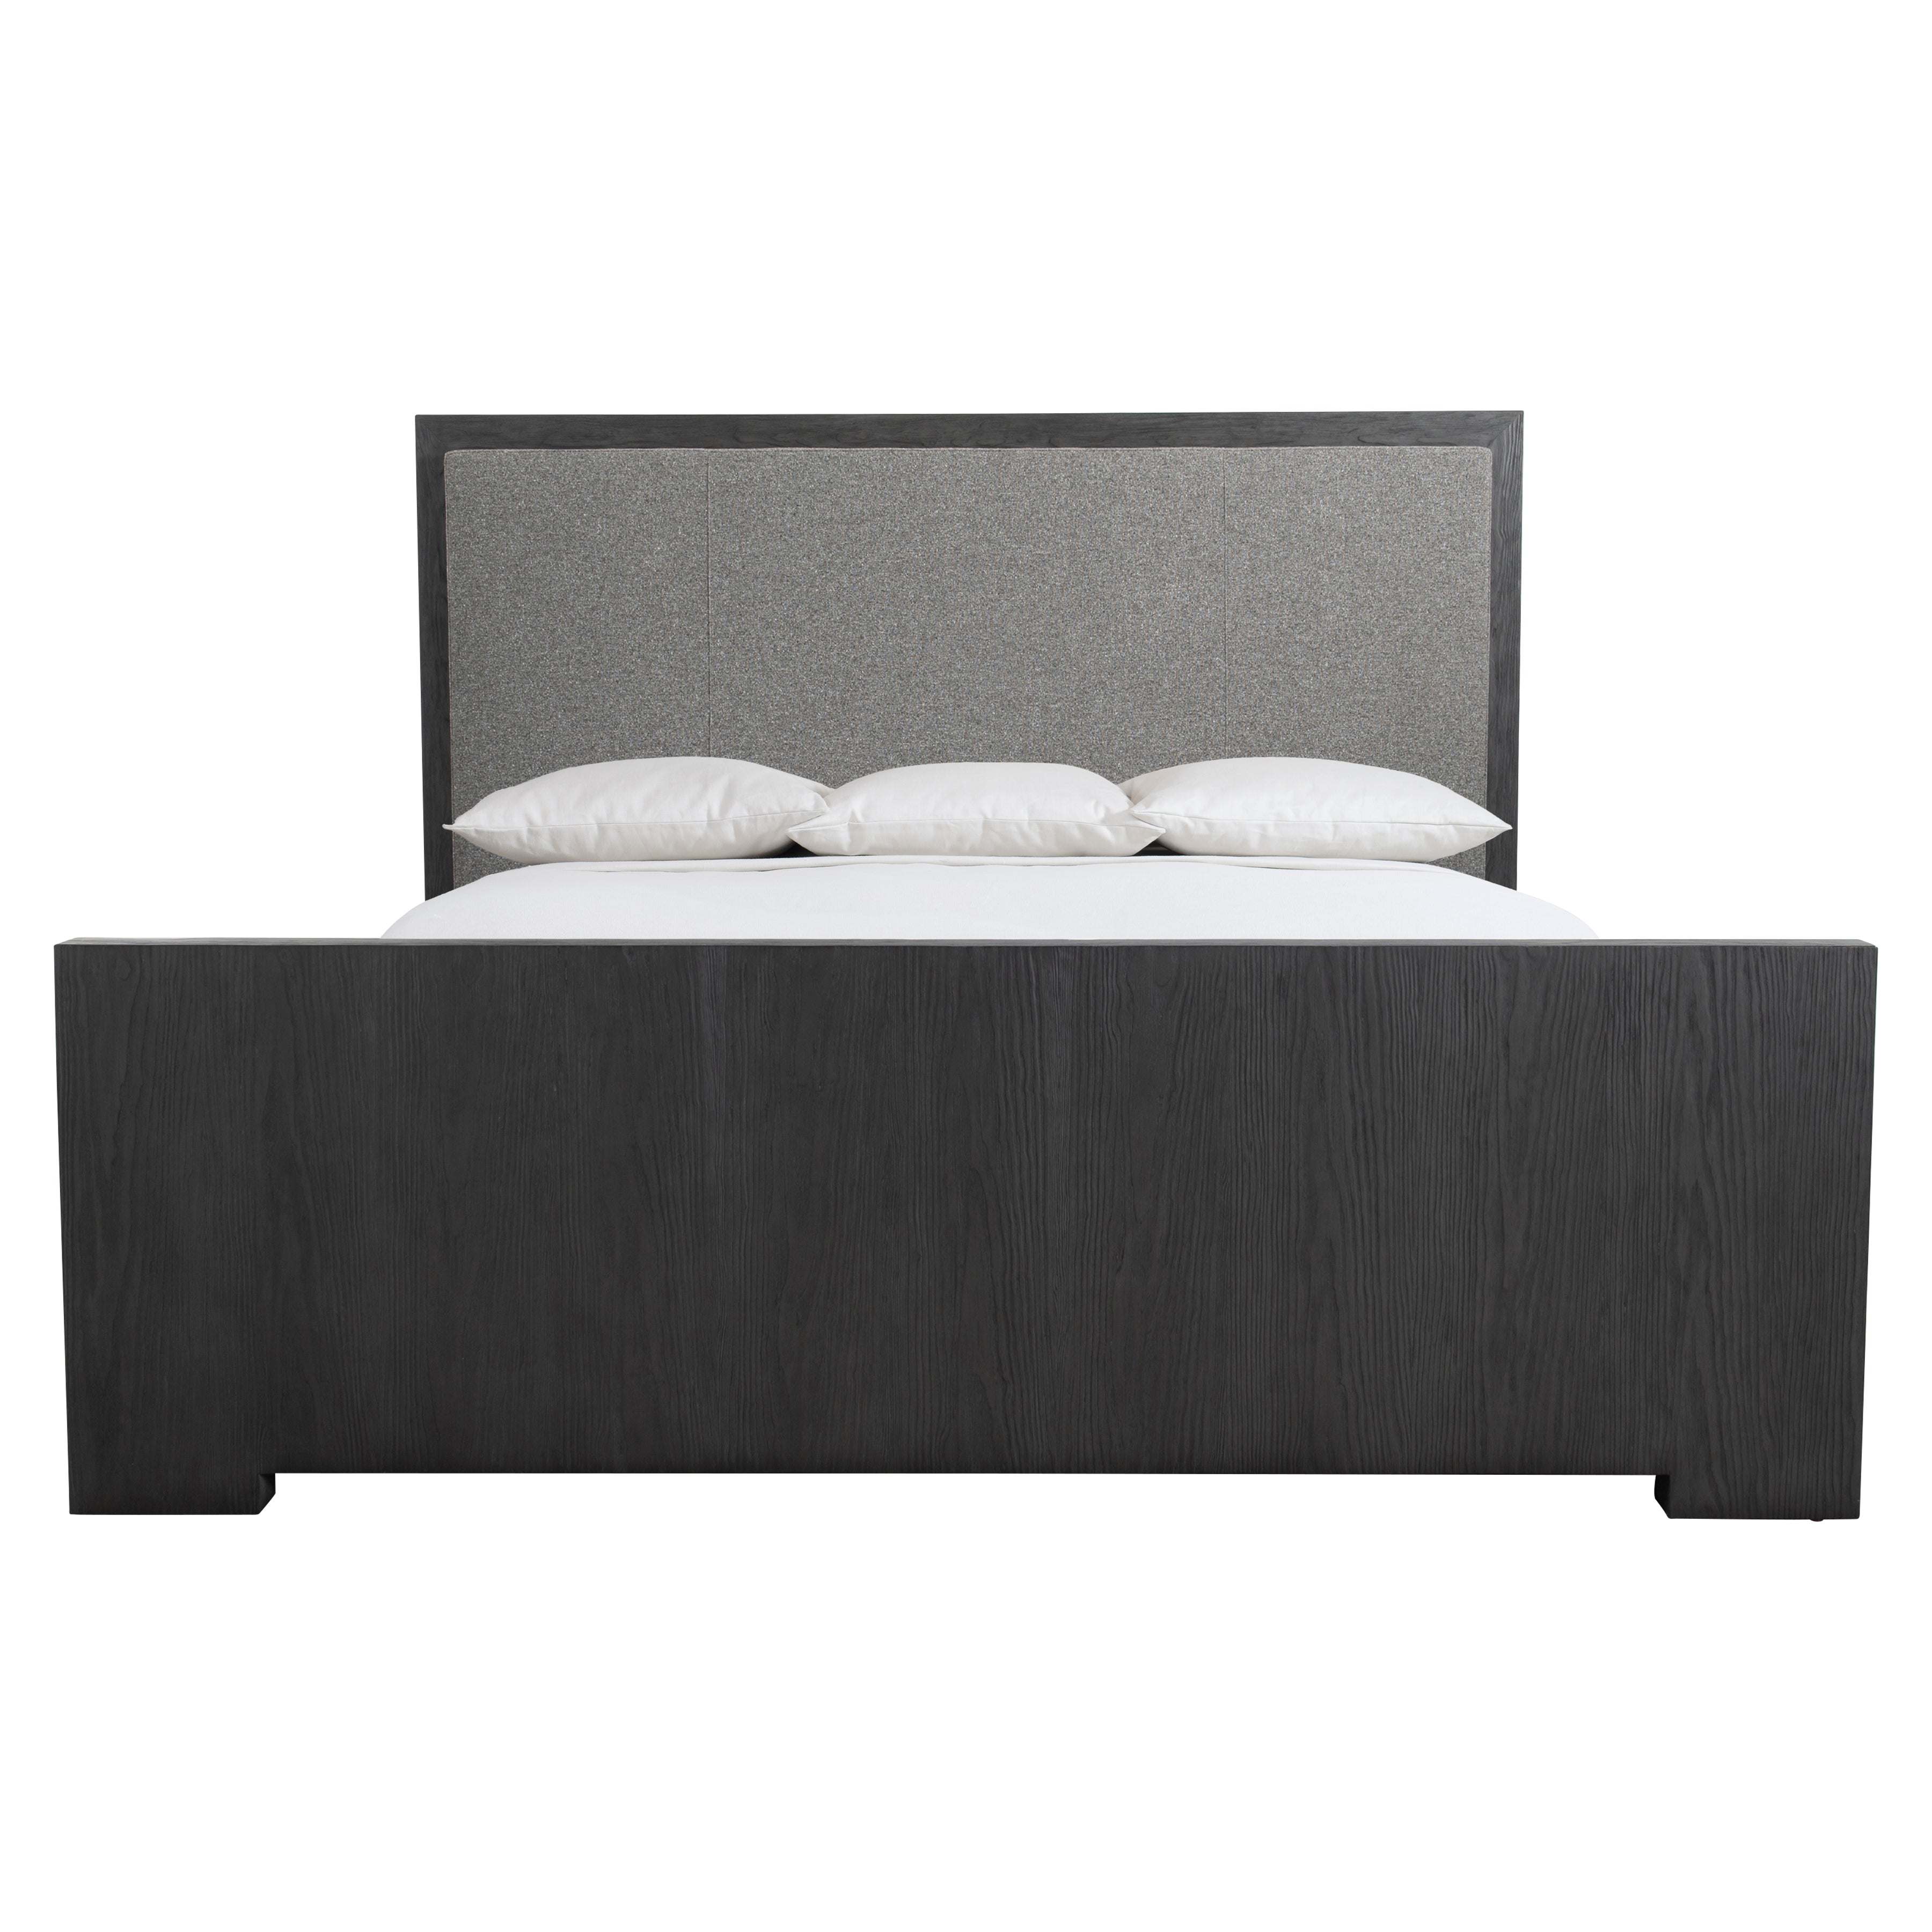 Trianon California King Panel Bed in L'Ombre Wood Finish